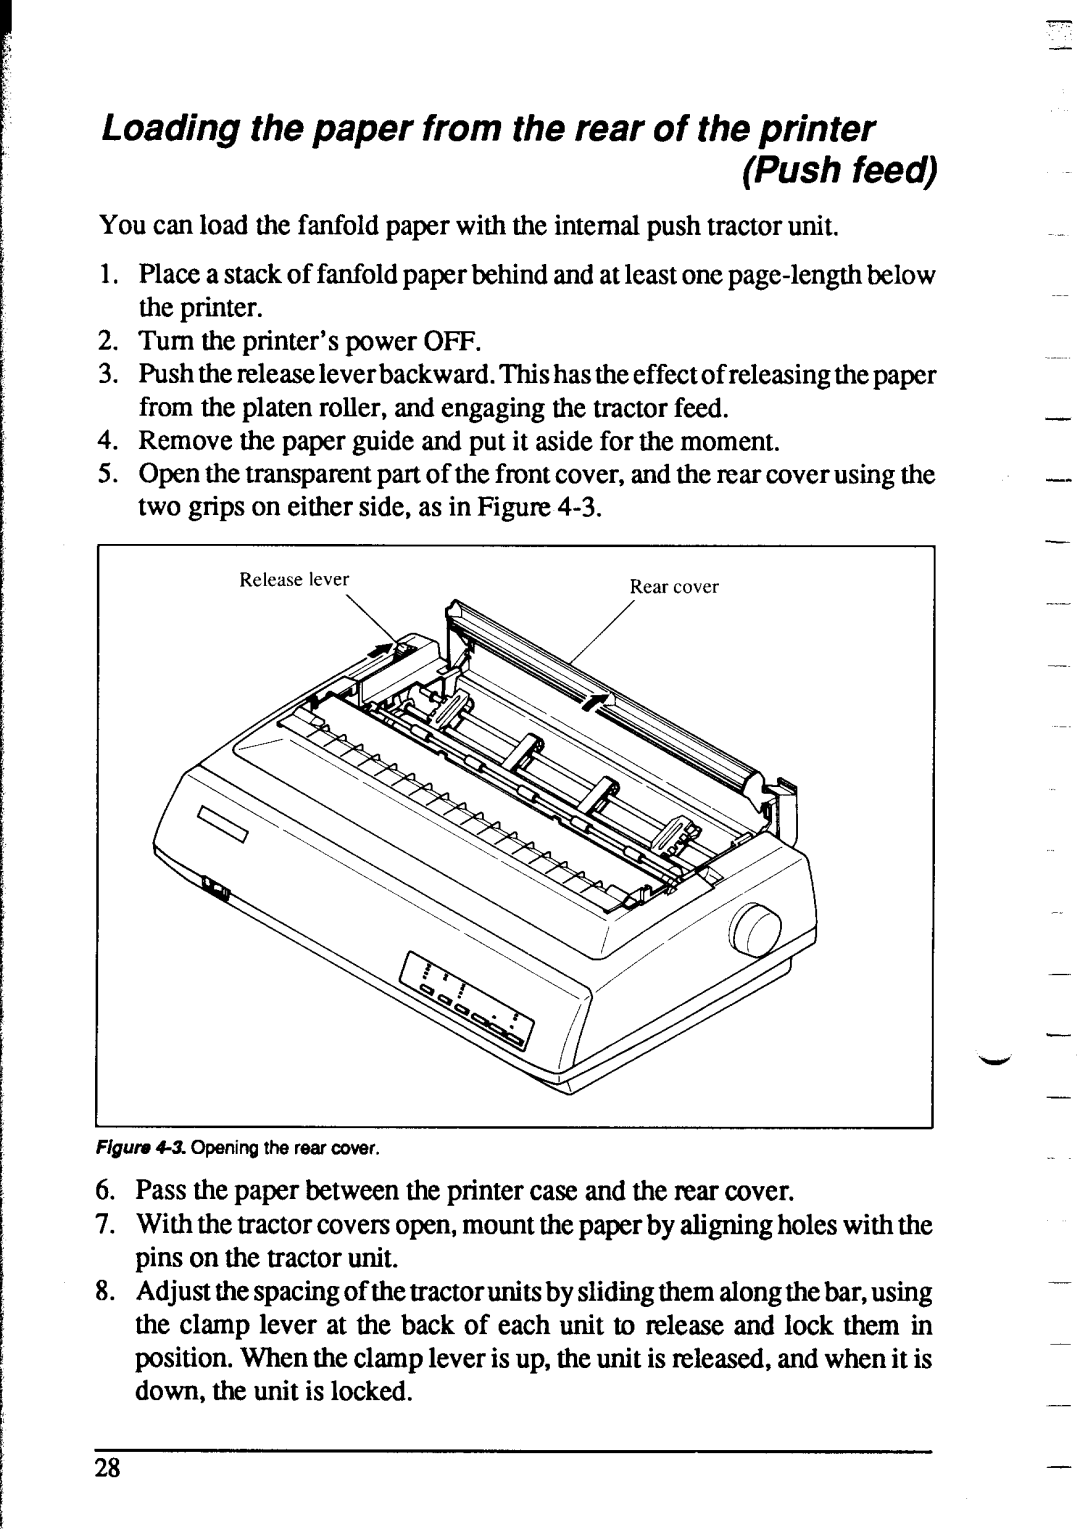 Star Micronics XR-1020, XR-1520 manual Loading the paper from the rear of the printer, Push feed 